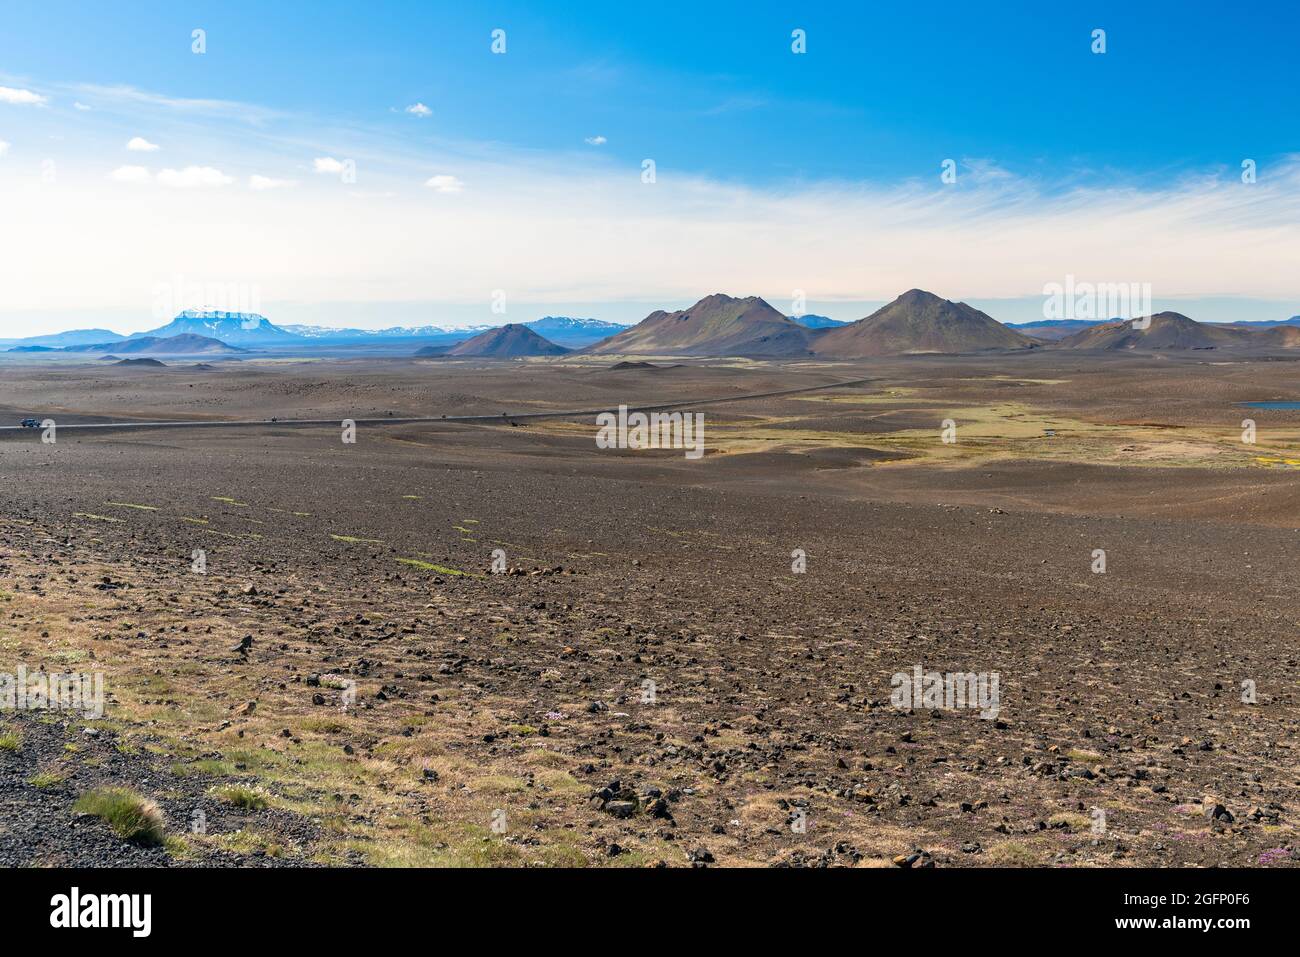 Impressive barren volcanic landscape crossed by a road on a clear summer day Stock Photo